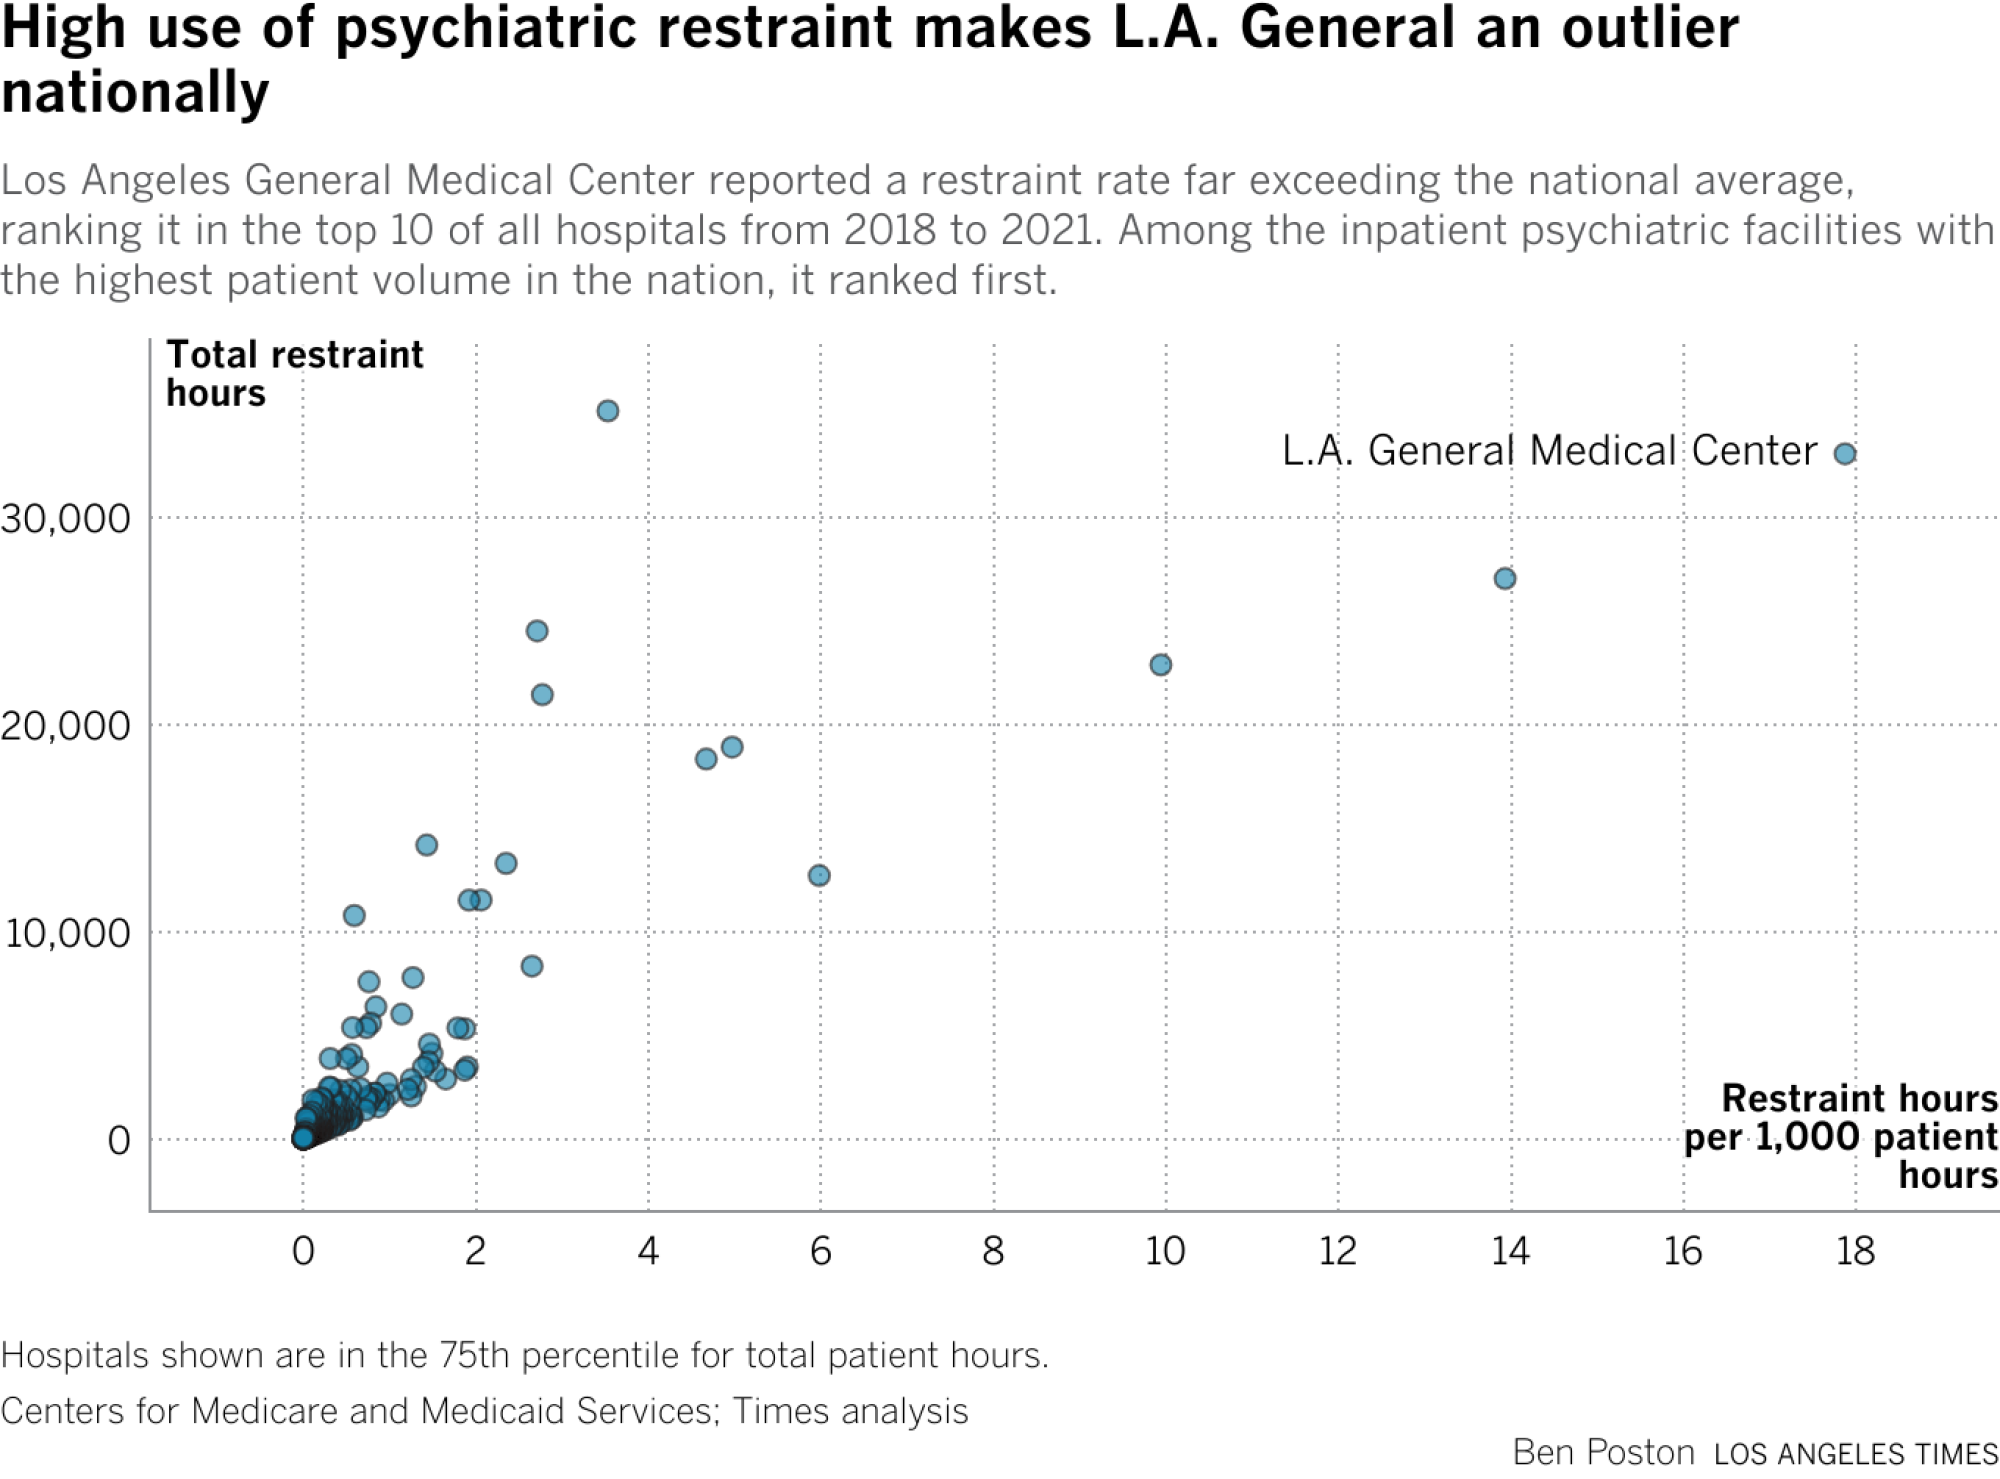 Los Angeles General Medical Center reported a restraint rate far exceeding the national average, ranking it in the top 10 of all hospitals from 2018 to 2021. Among the inpatient psychiatric facilities with the highest patient volume in the nation, it ranked first.